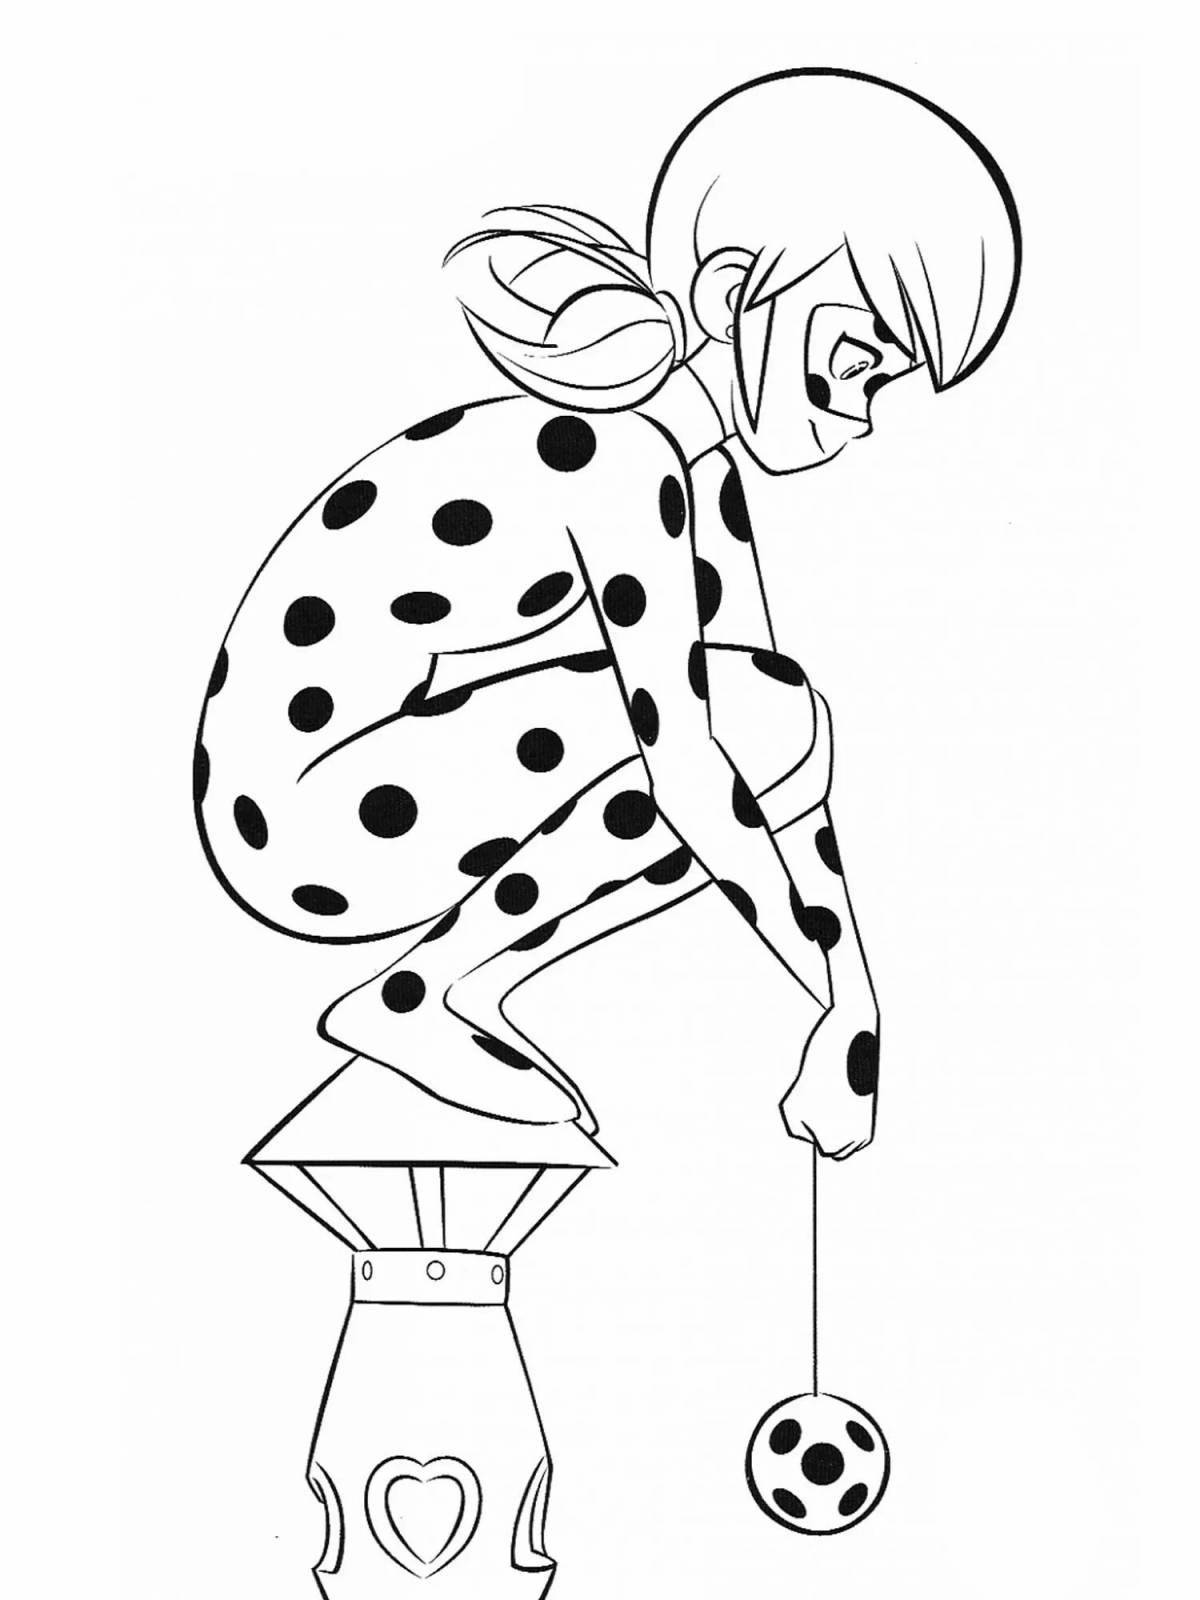 Lady bug's funny christmas coloring book